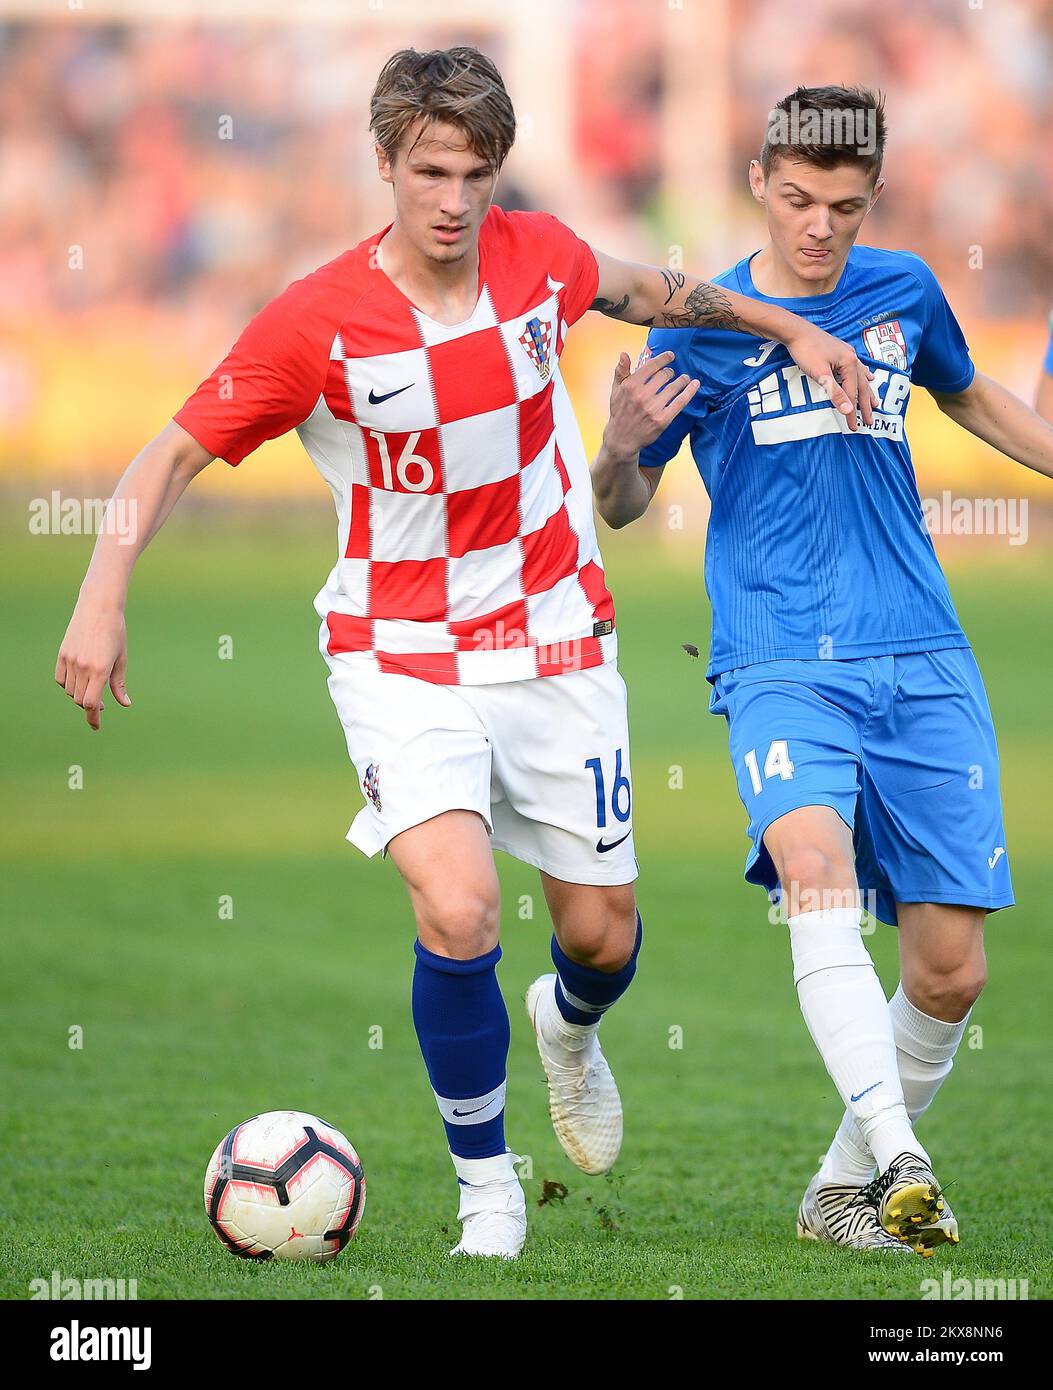 09.10.2018., Croatia, Bjelovar - At the City Stadium was played a festive match between NK Bjelovar and the Croatian national football team on the occasion of the 110th anniversary of the club. Tin Jedvaj, Jakov Pranjic. Photo: Marko Prpic/PIXSELL Stock Photo